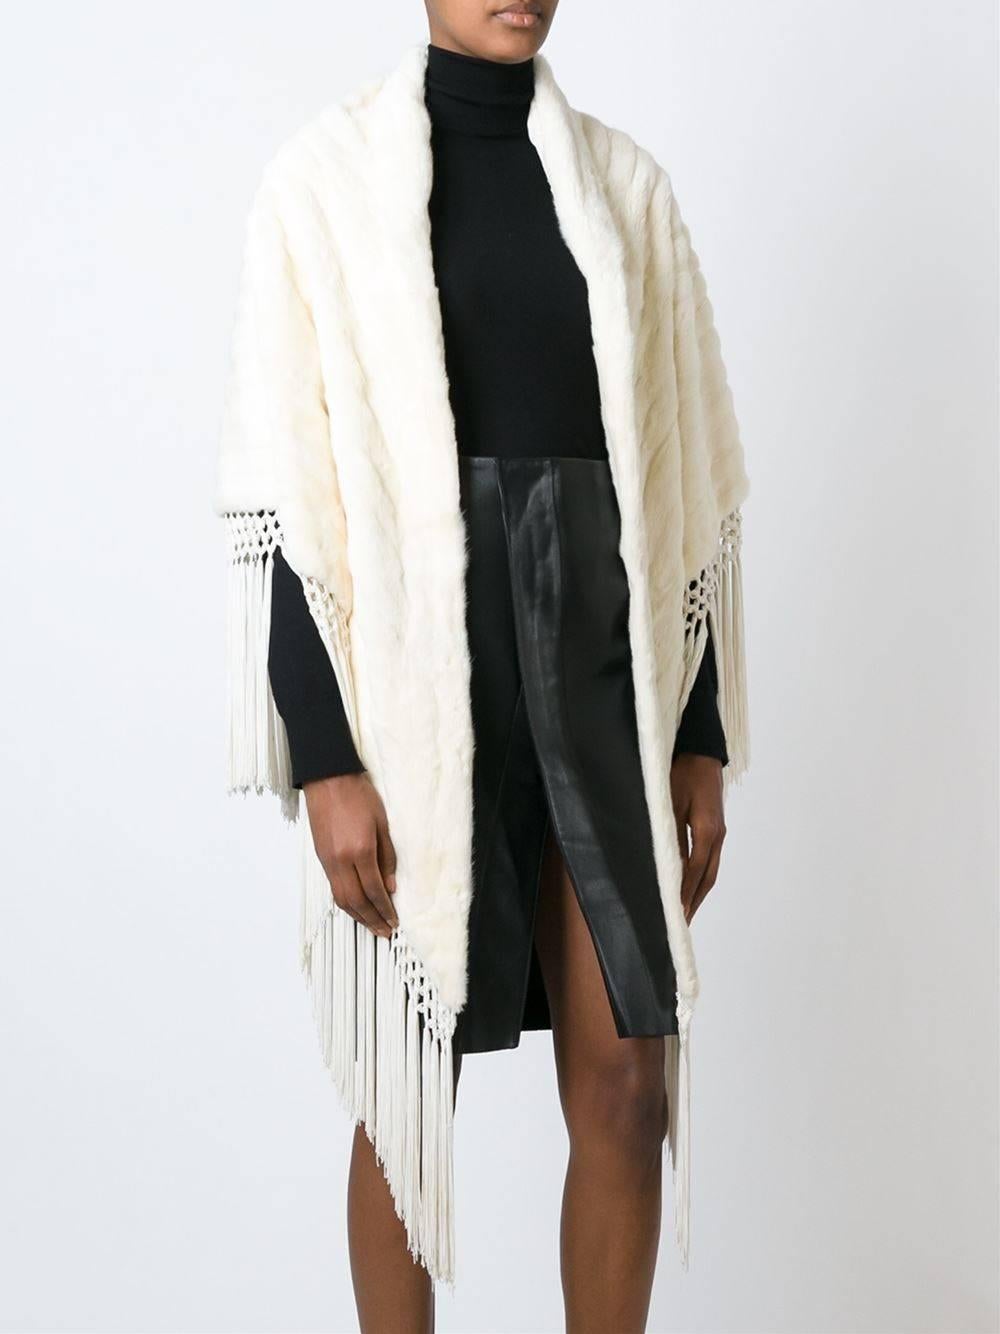 Marvelous Fendi ivory white ermine fur fringed cape. It features long fringes. Lined.
The item is vintage, it was produced in the 70s and is in very good conditions. 

Busto: 46,5 cm
Height: 179 cm
Hip: 42,5 cm
Vita:	30,5 cm

Please note that this